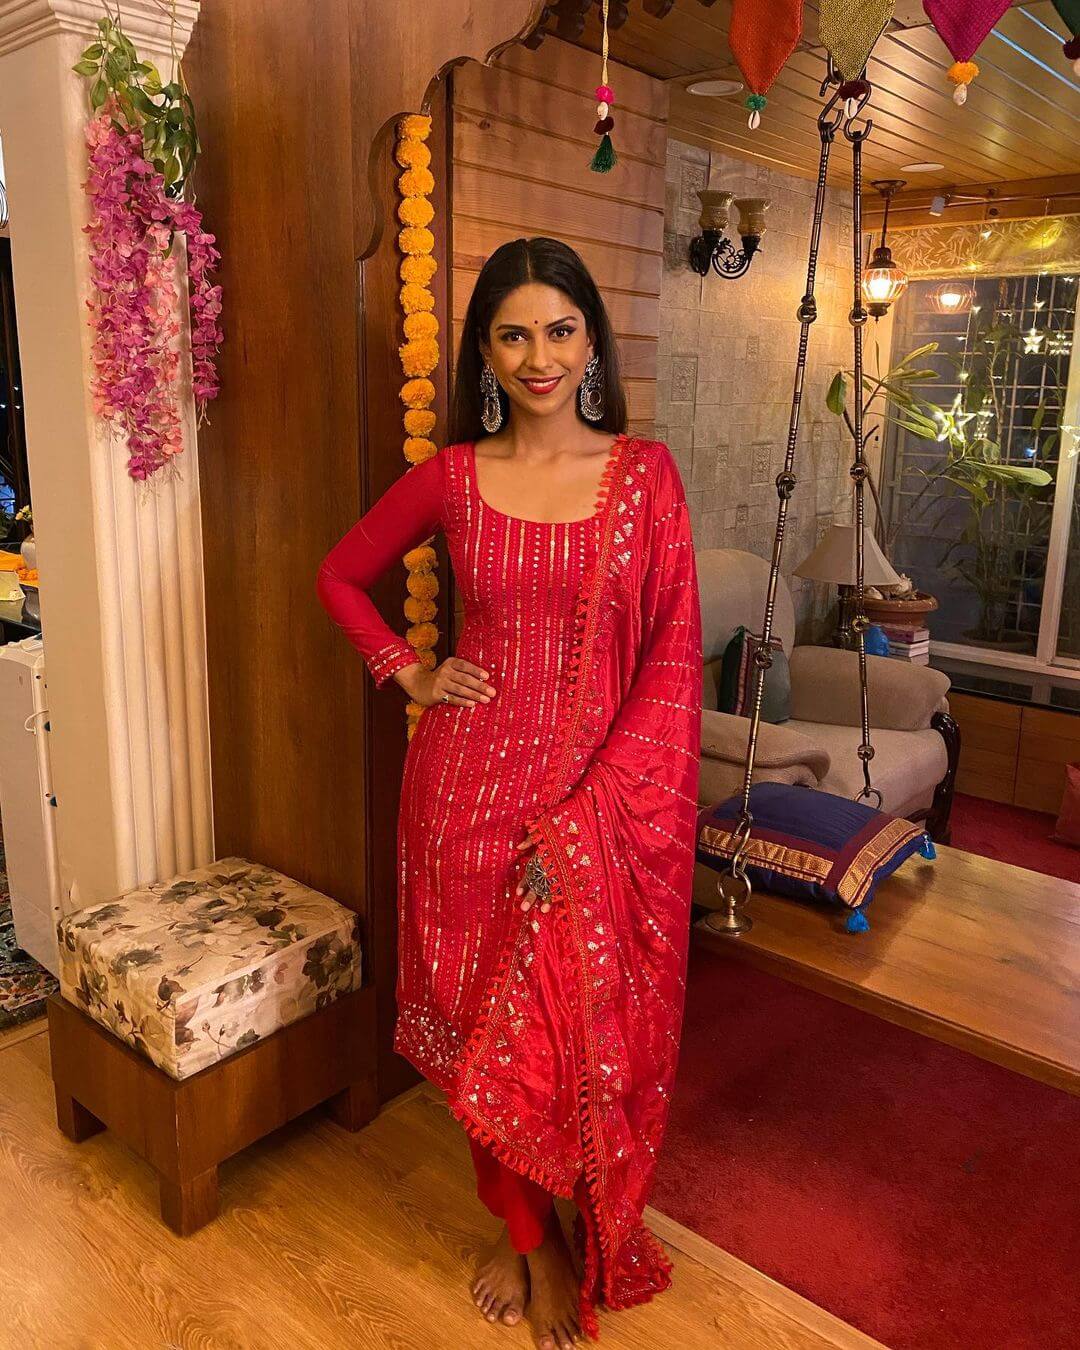 Aditi Sarangdhar Cool,Breezy & Ethnical Outfit Looks: Traditional Outfit 